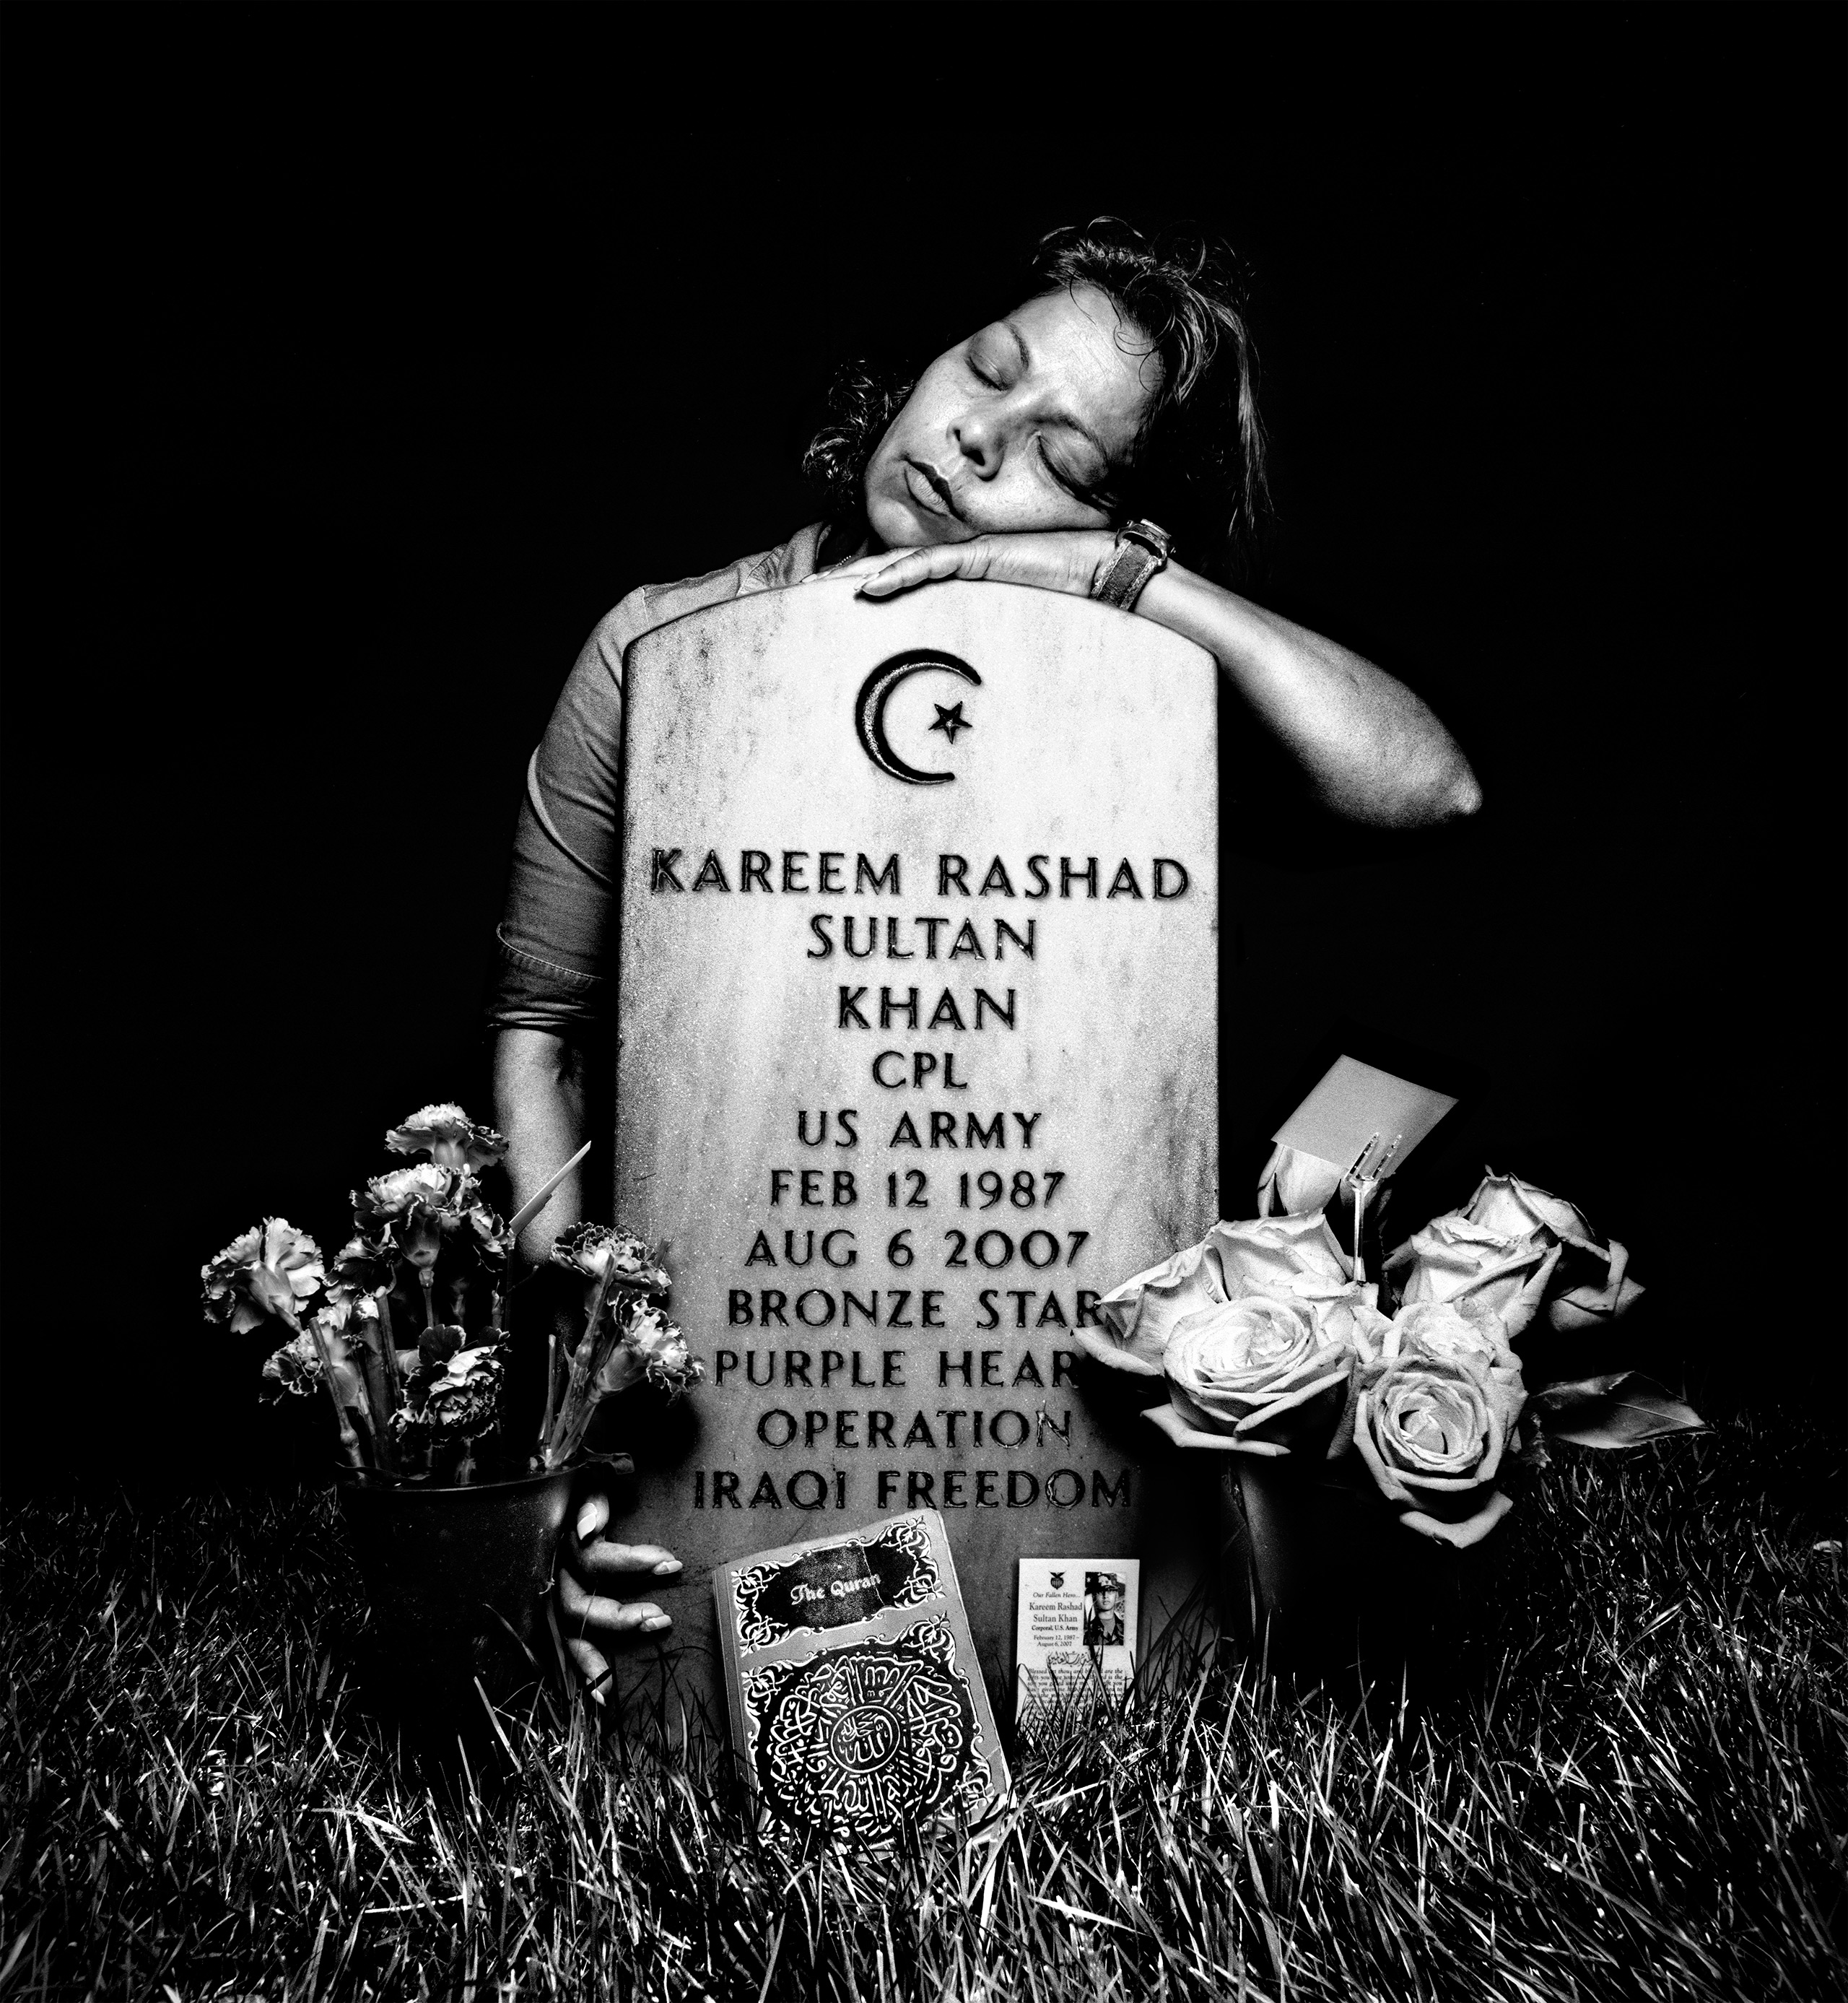 Elsheba Khan at the grave of her son, Spc. Kareem Rashad Sultan Khan, in Section 60 of Arlington National Cemetery, 2008. Spurred by the September 11 attacks on the World Trade Center, Khan, a Muslim, enlisted immediately after graduating high school in 2005 and was sent to Iraq in July 2006. He was killed a year later.